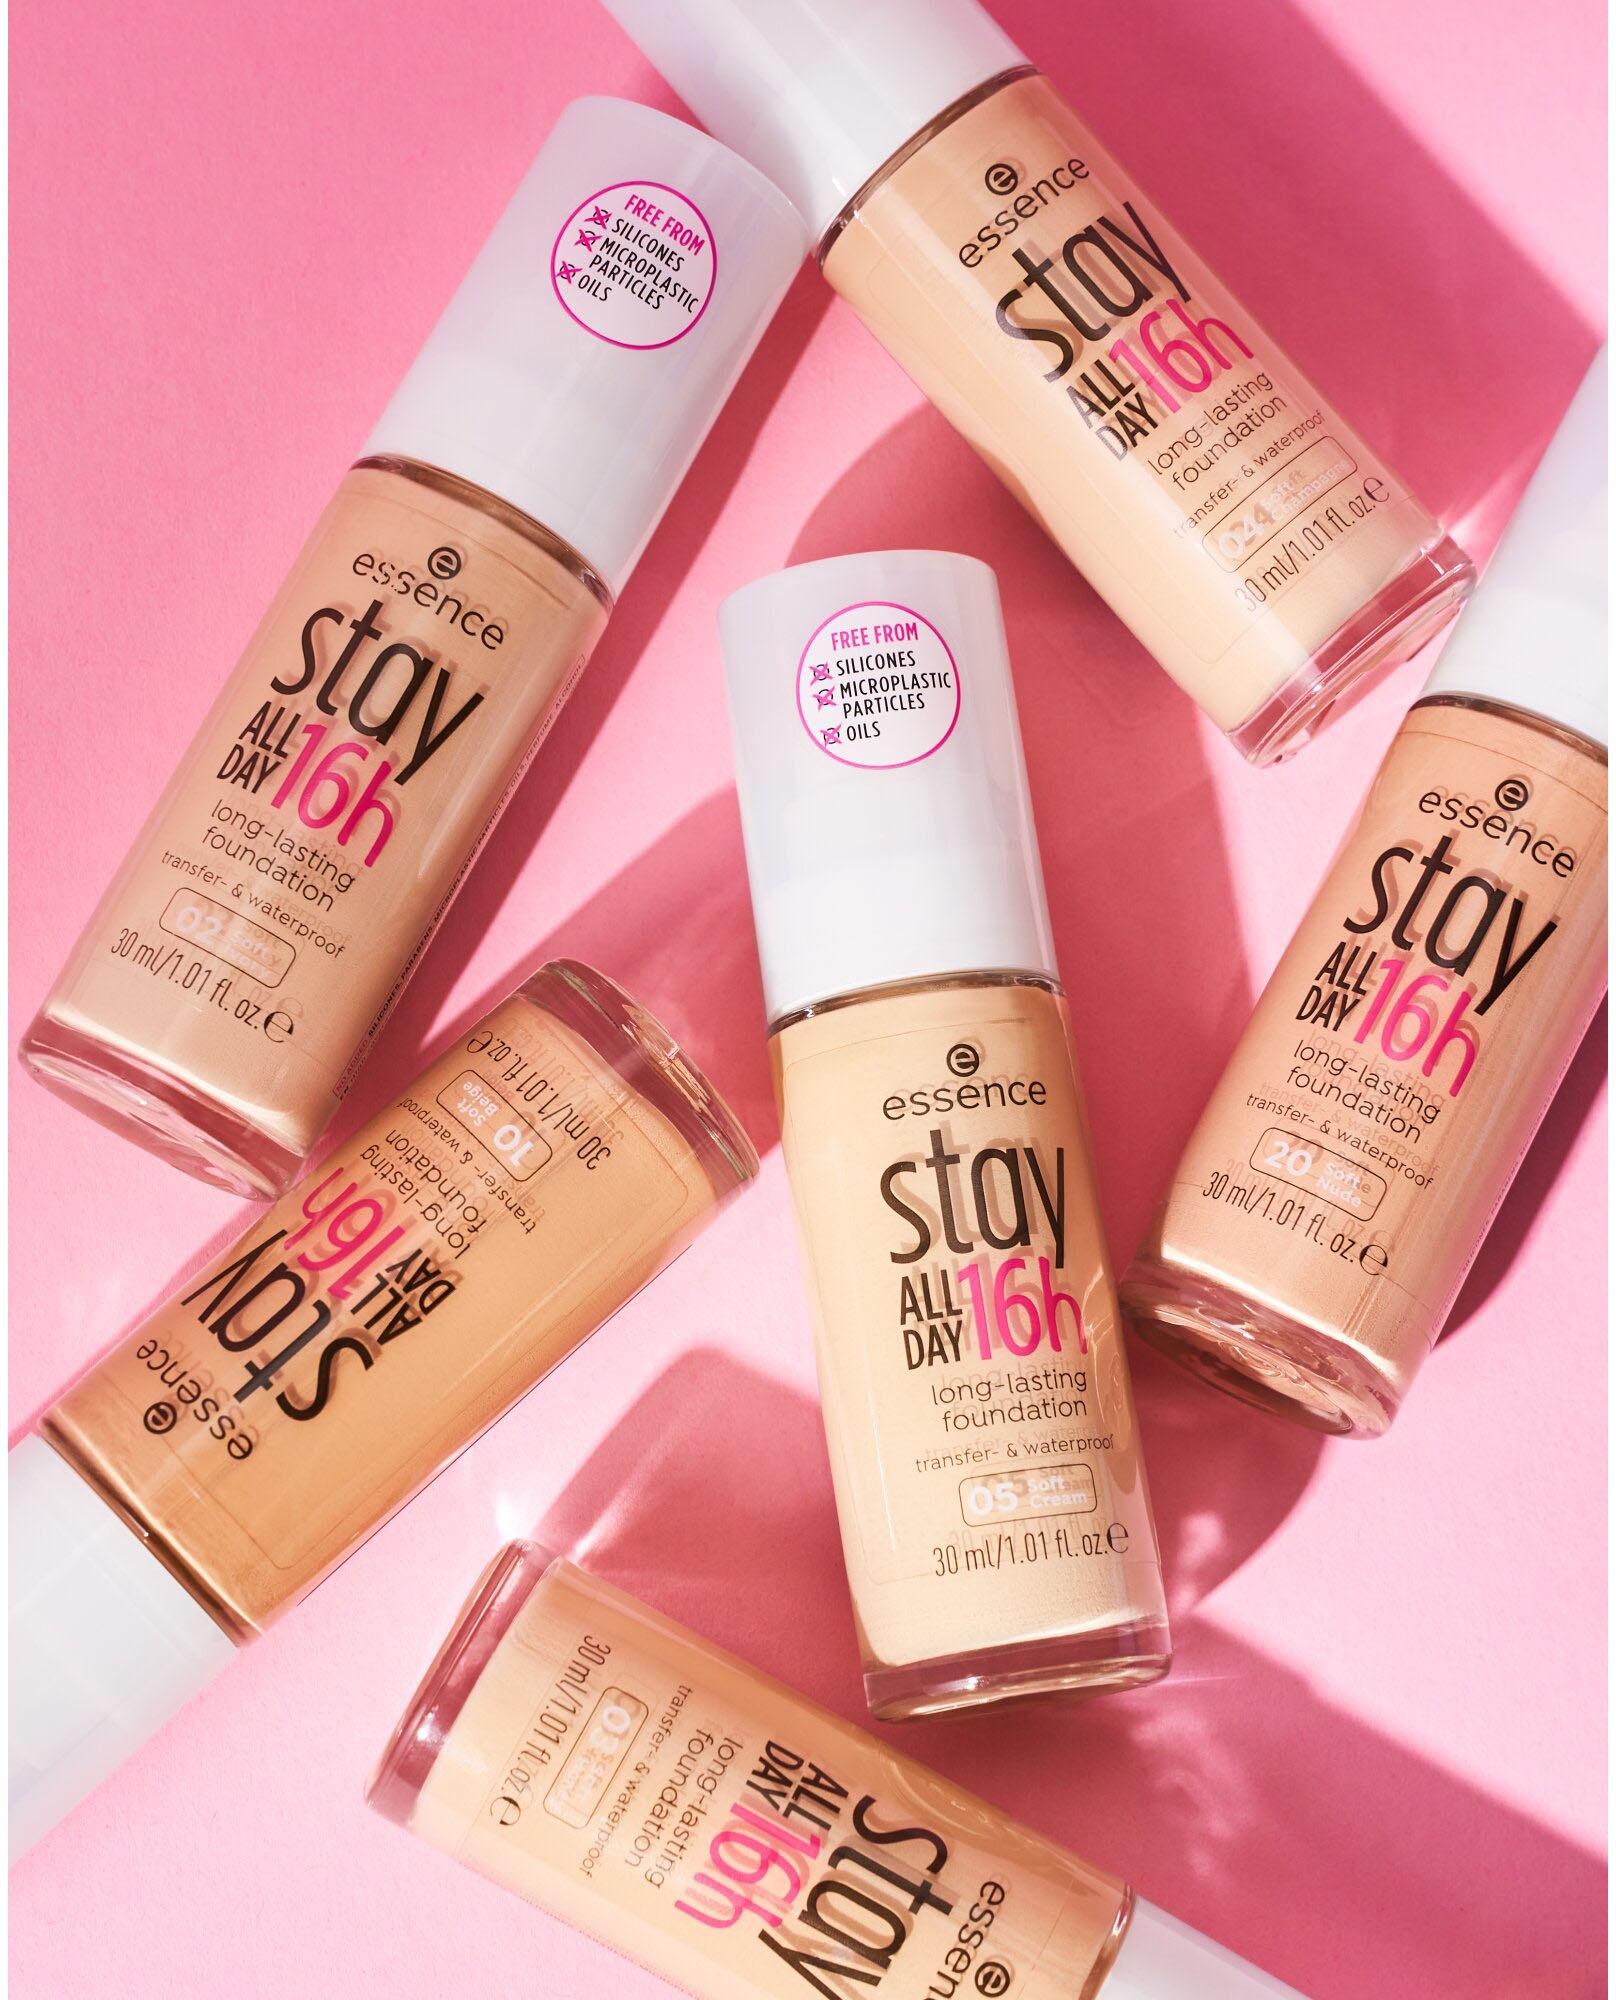 16h DAY »stay bei Foundation ALL Essence ♕ 3 tlg.) long-lasting«, (Set,